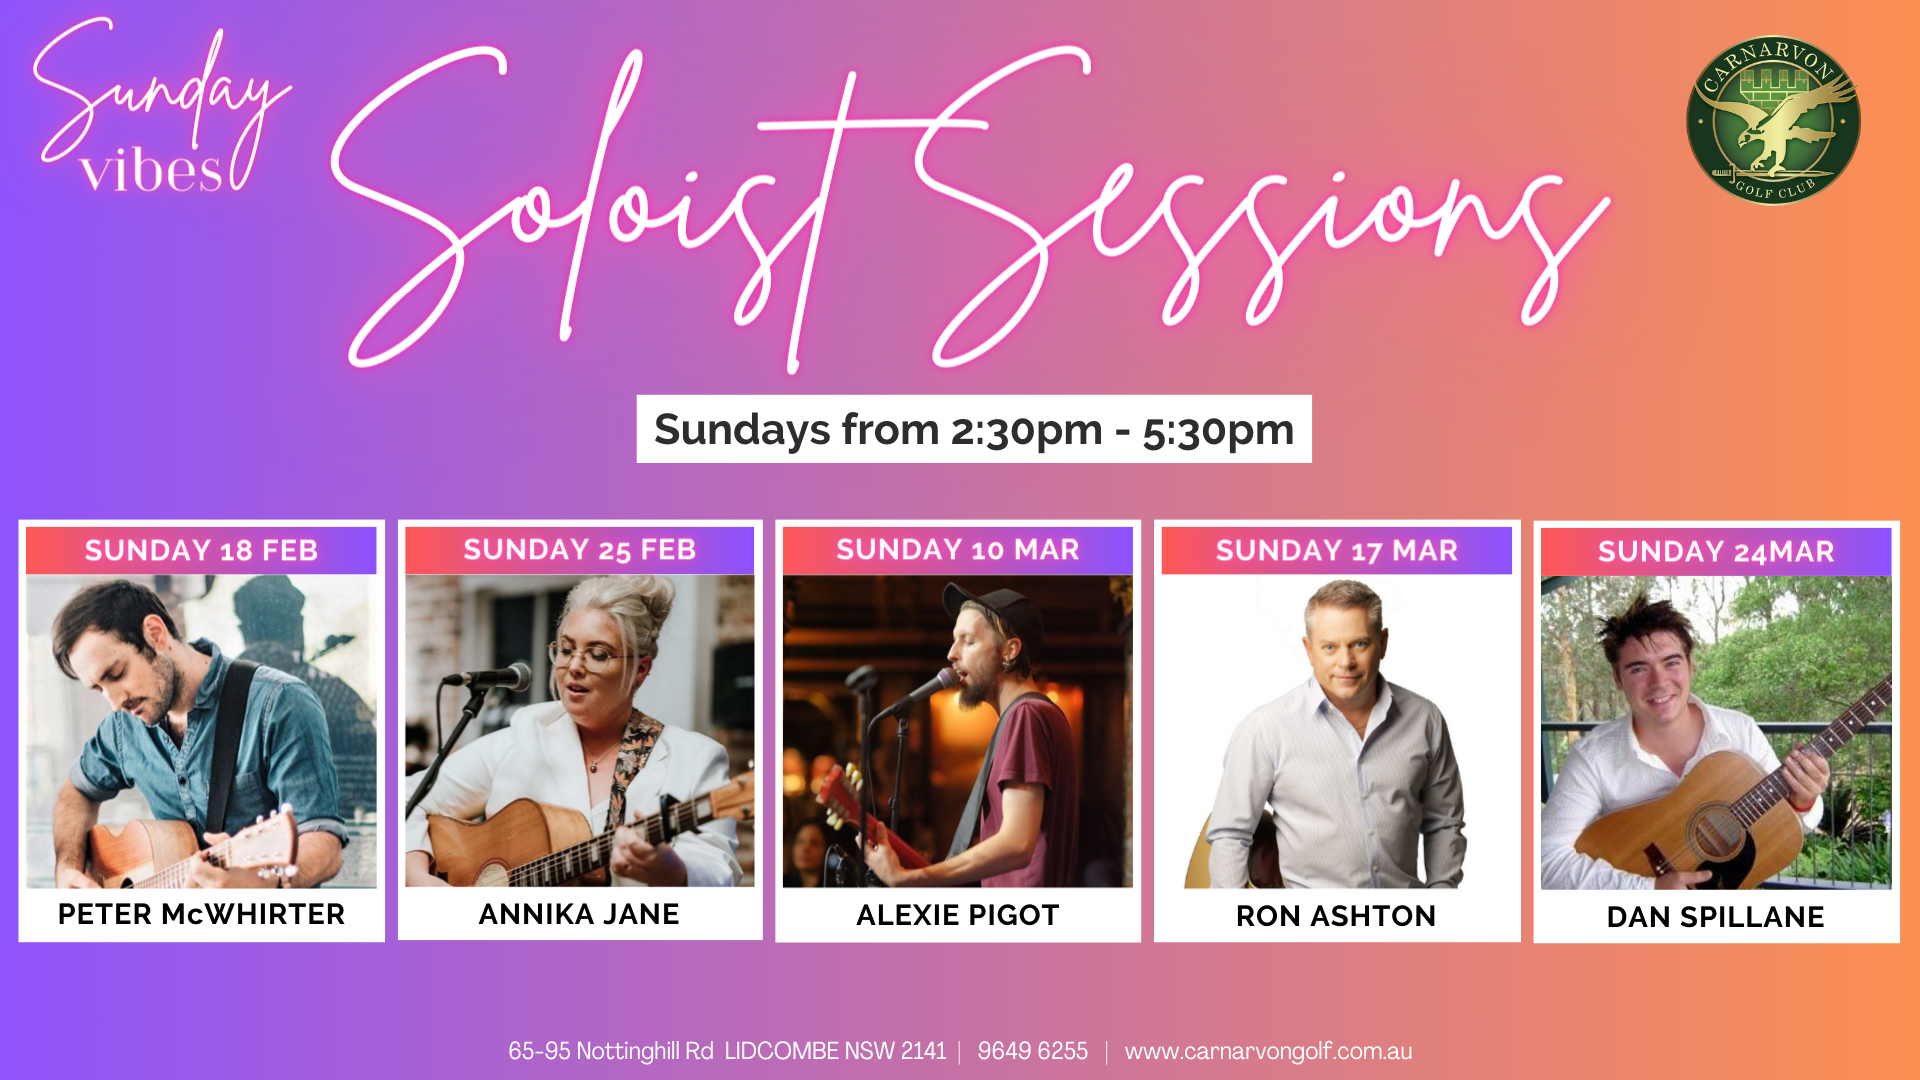 Soloist Sessions